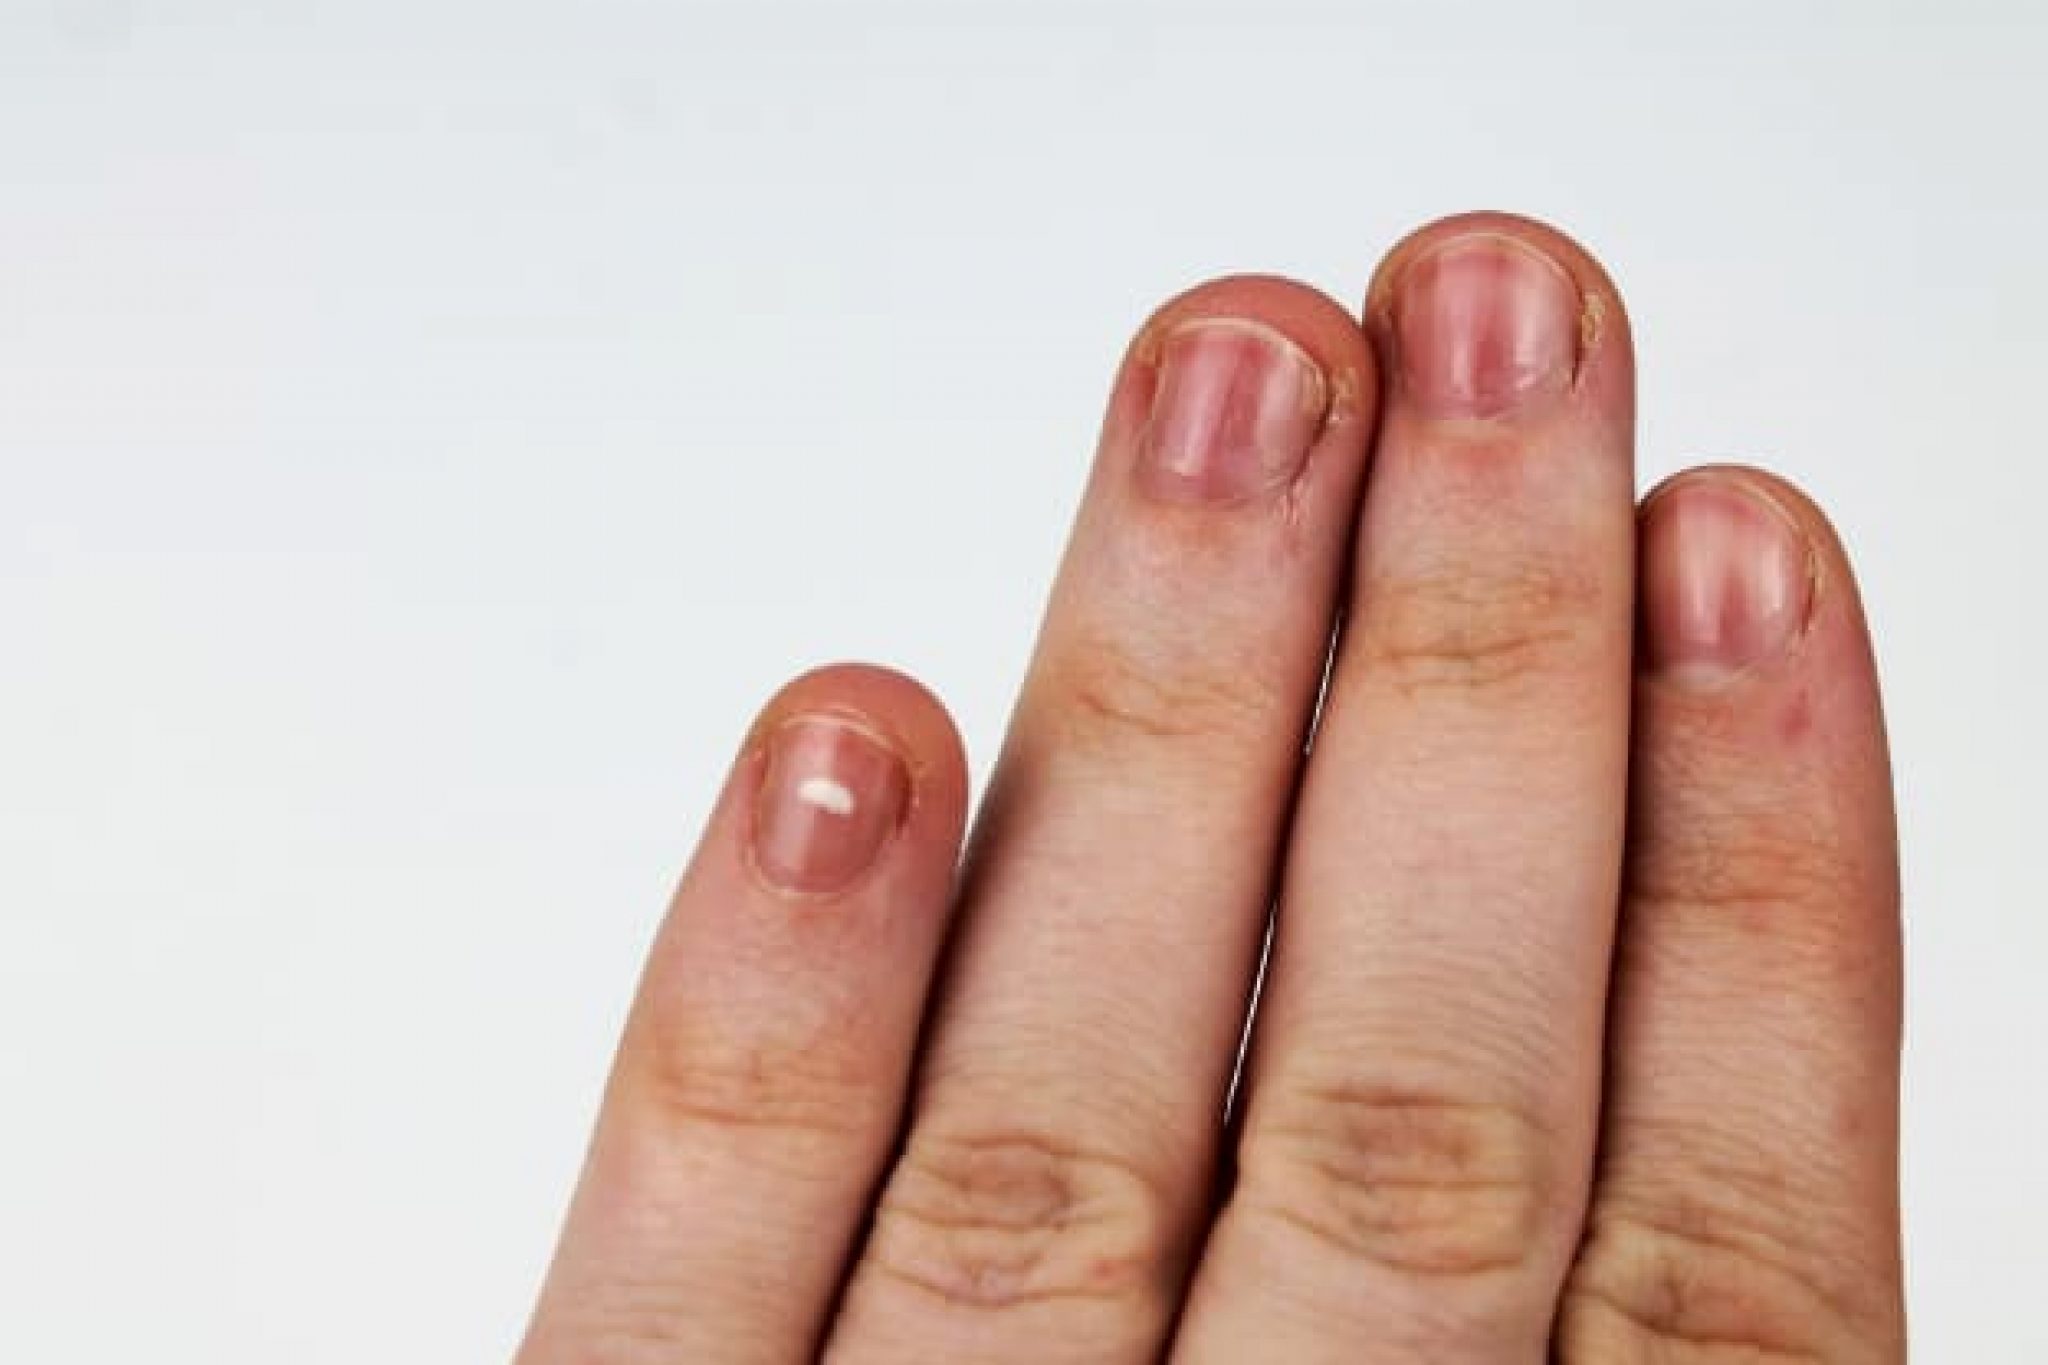 nail care and tips from experts around the world